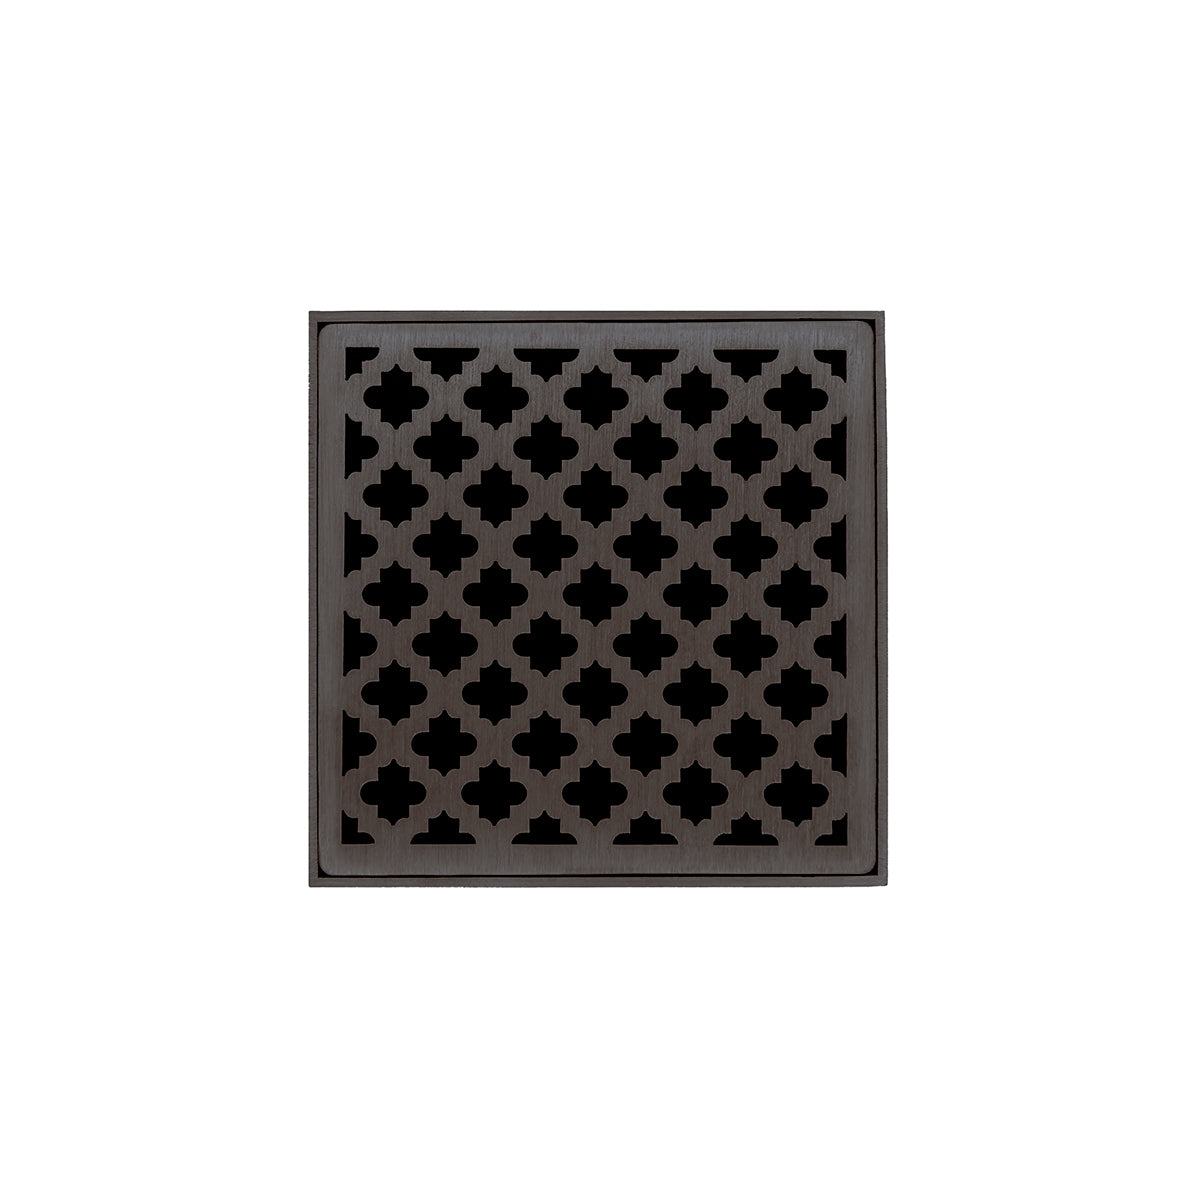 Infinity Drain 5" x 5" MDB 5 Premium Center Drain Kit with Moor Pattern Decorative Plate with ABS Bonded Flange Drain Body, 2", 3" and 4" Outlet